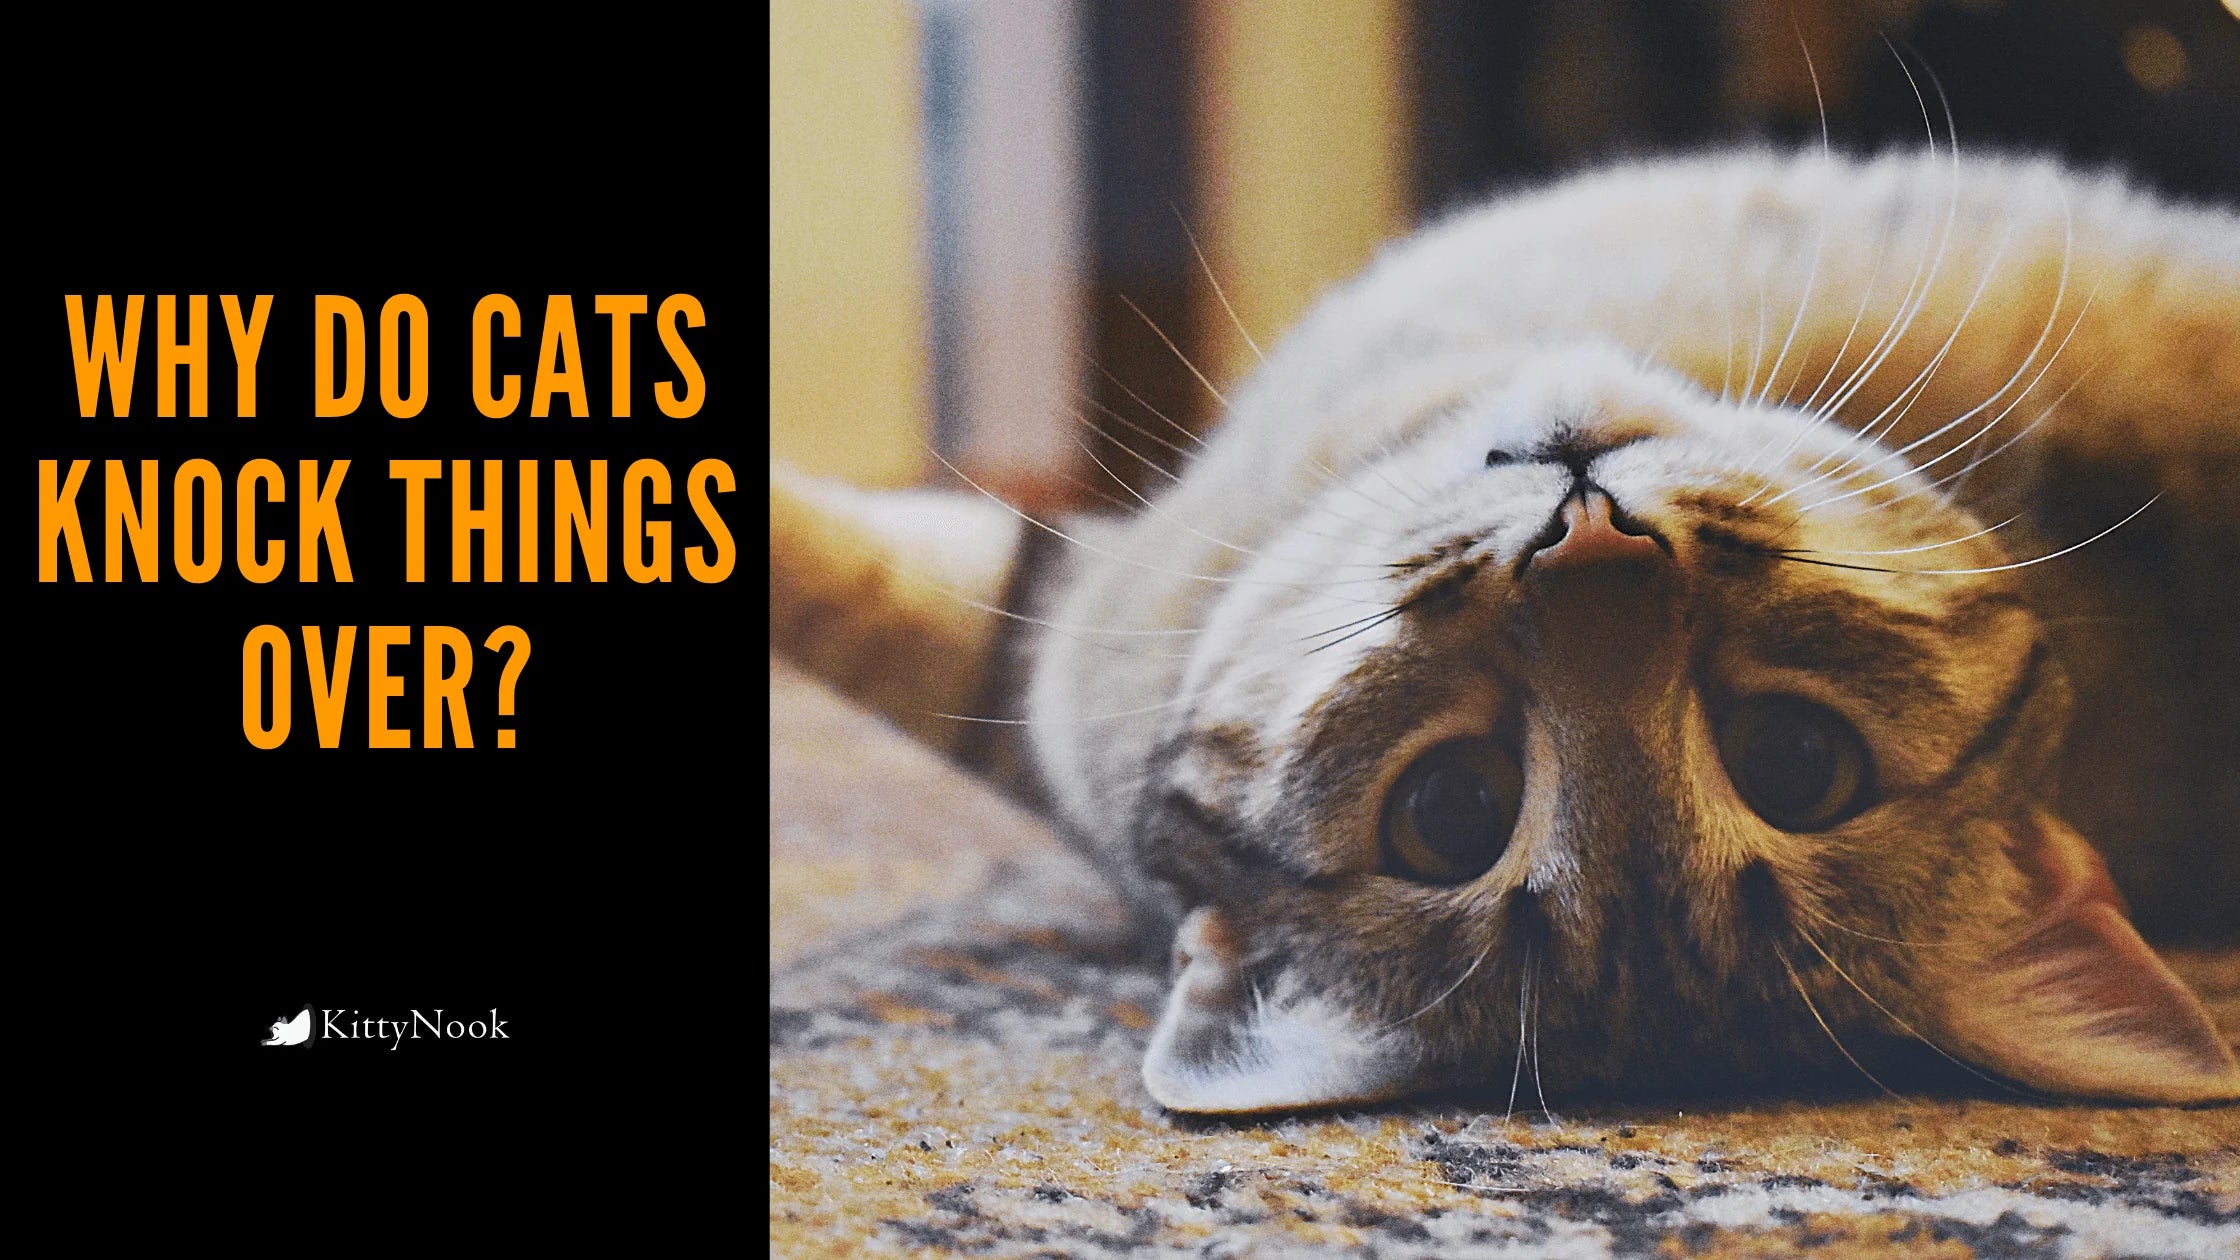 Why Do Cats Knock Things Over? - KittyNook Cat Company